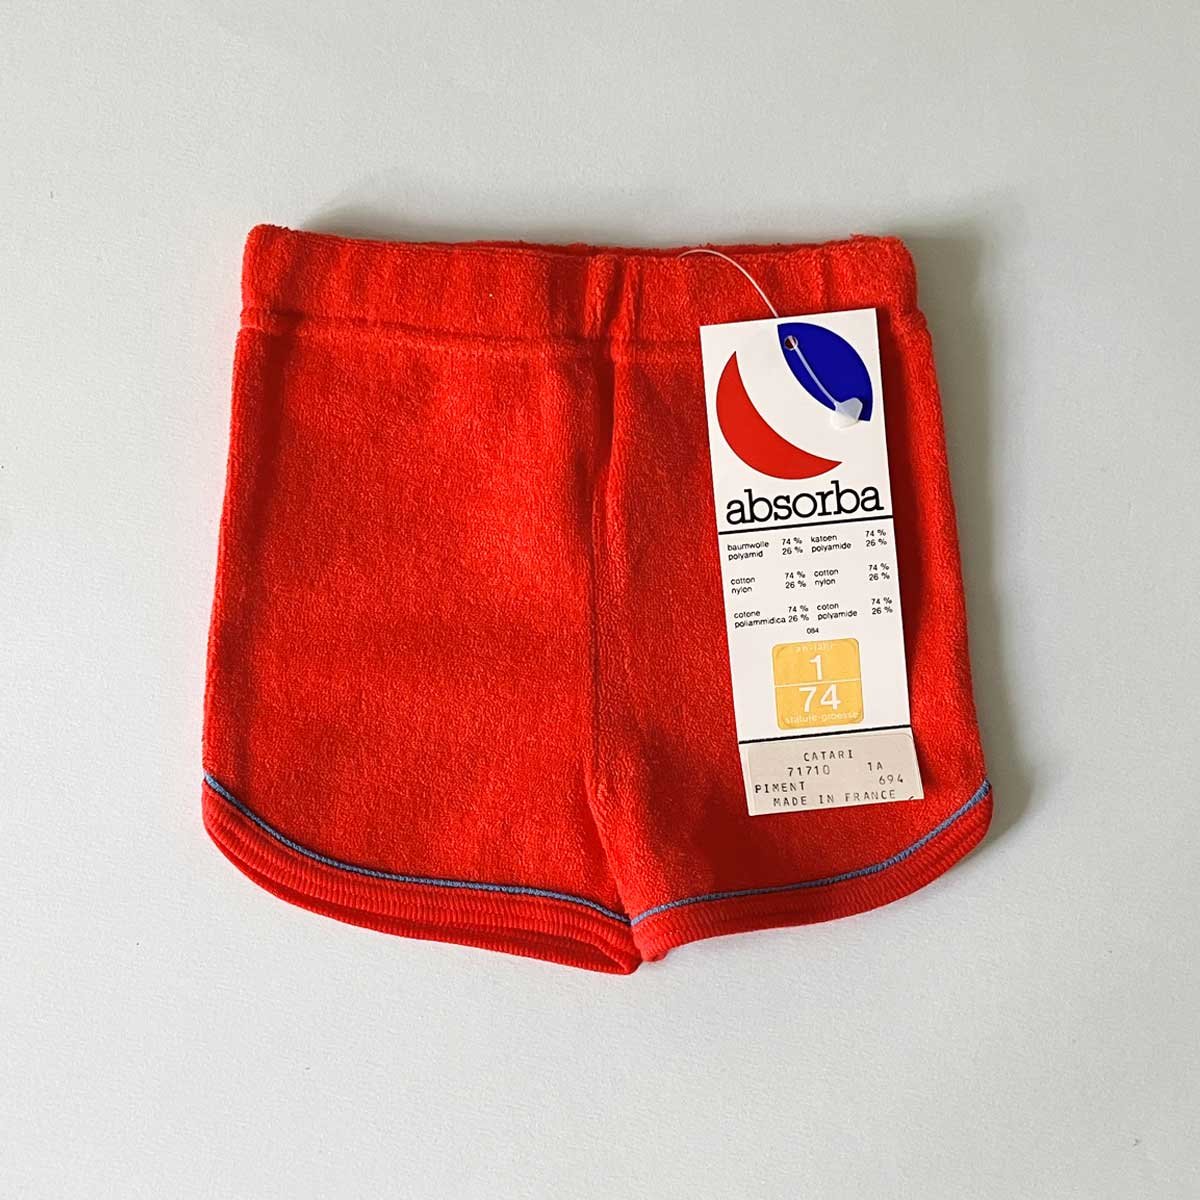 Image of Short rouge 12 mois Absorba années 70 stock neuf